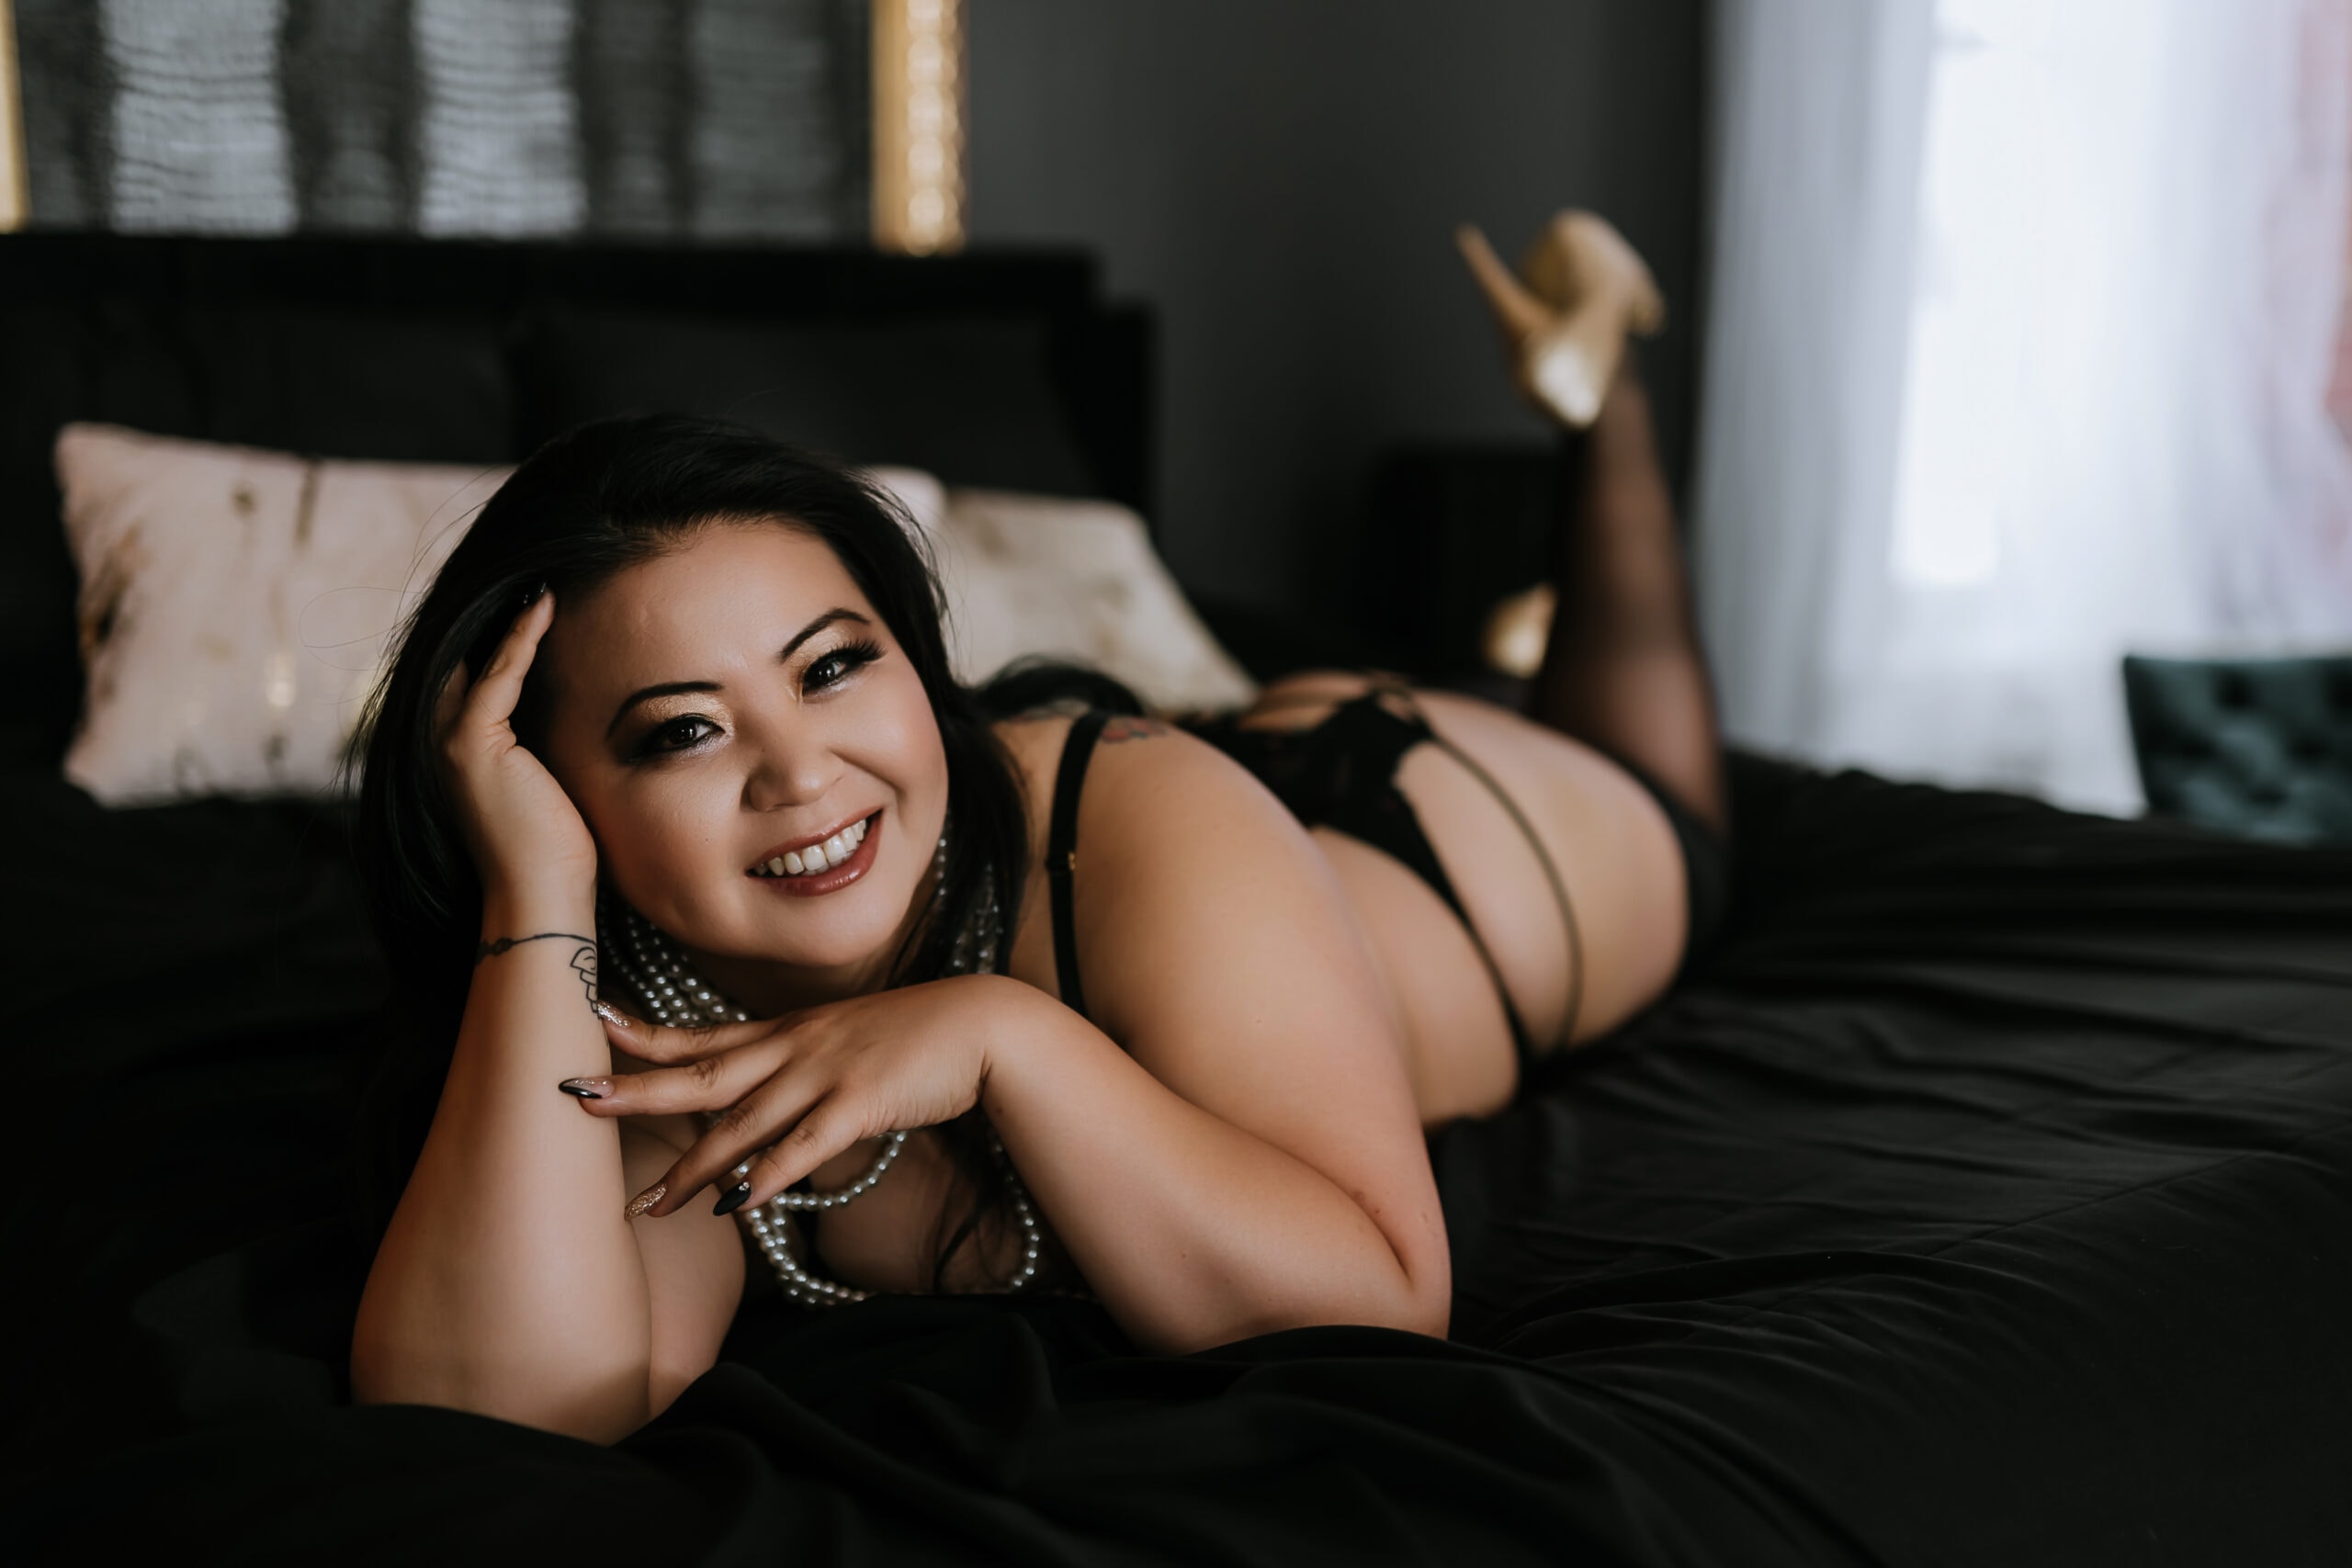 Plus sized woman on bed smiling at camera. Photo by Katie O'Docharty, Denver Boudoir Photographer.